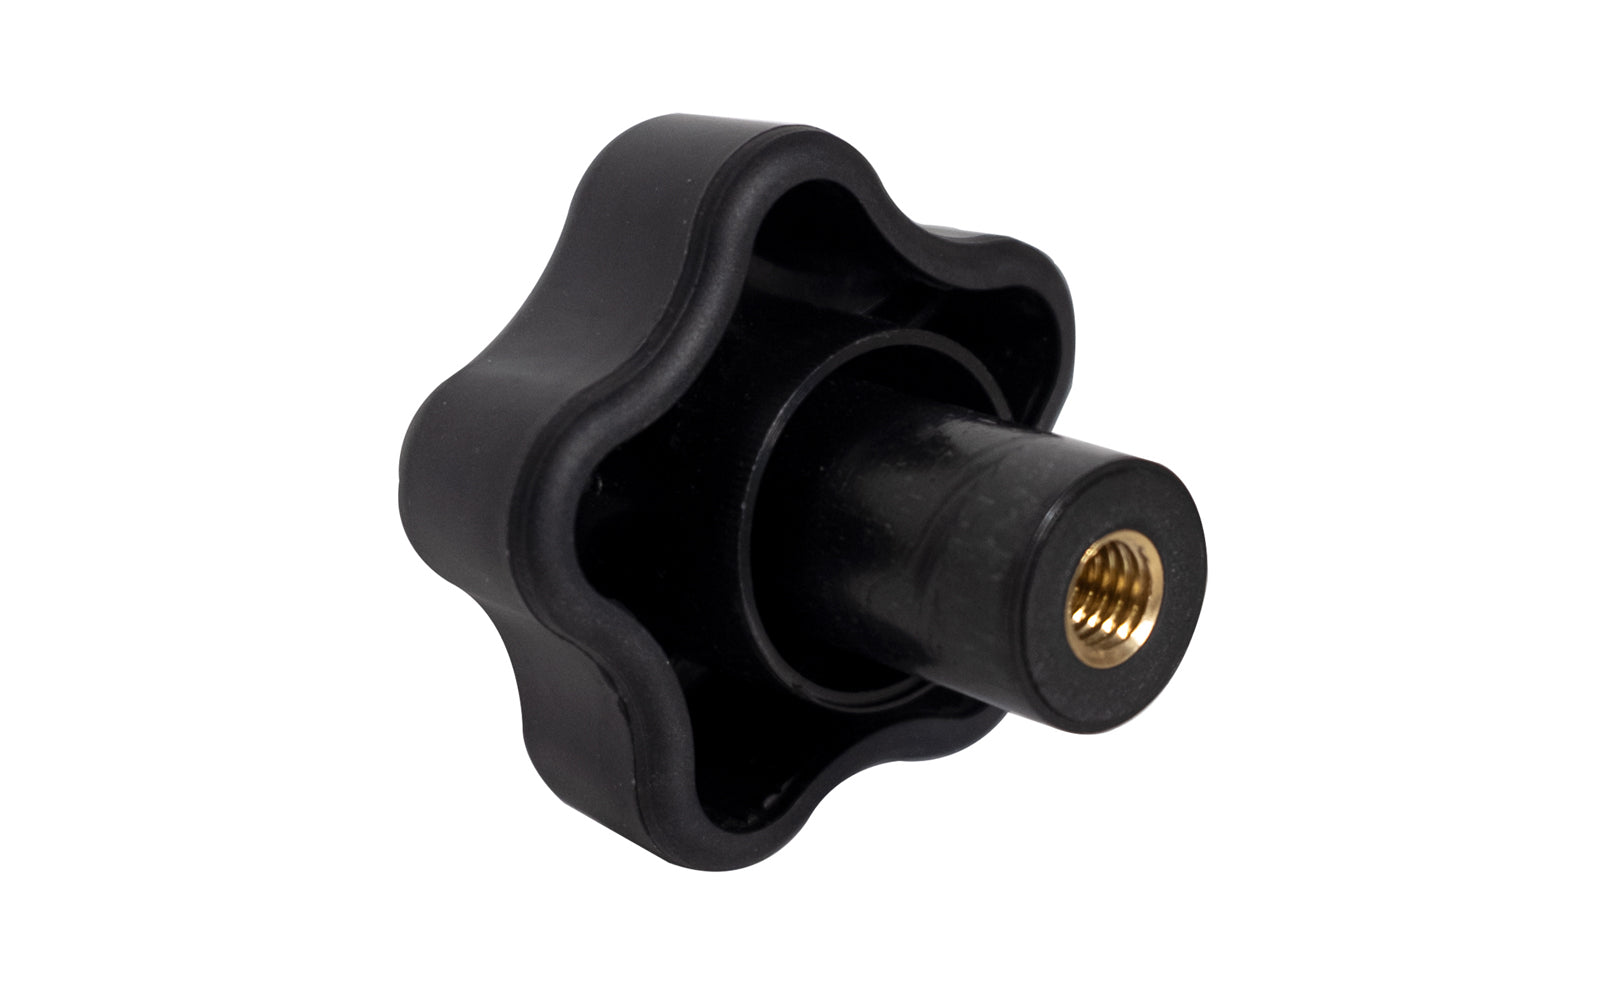 FastCap knobs are over-molded with a rubber coating, which makes them feel & work great. 3/8-16 female thread. FastCap Model KNOB 3/8-16 FEMALE. Utility Five Point Knob. Rubberized grip. 3/8-16 thread. Machine Knobs. 663807029737. 5 point knob. Utility Knob. Female knob